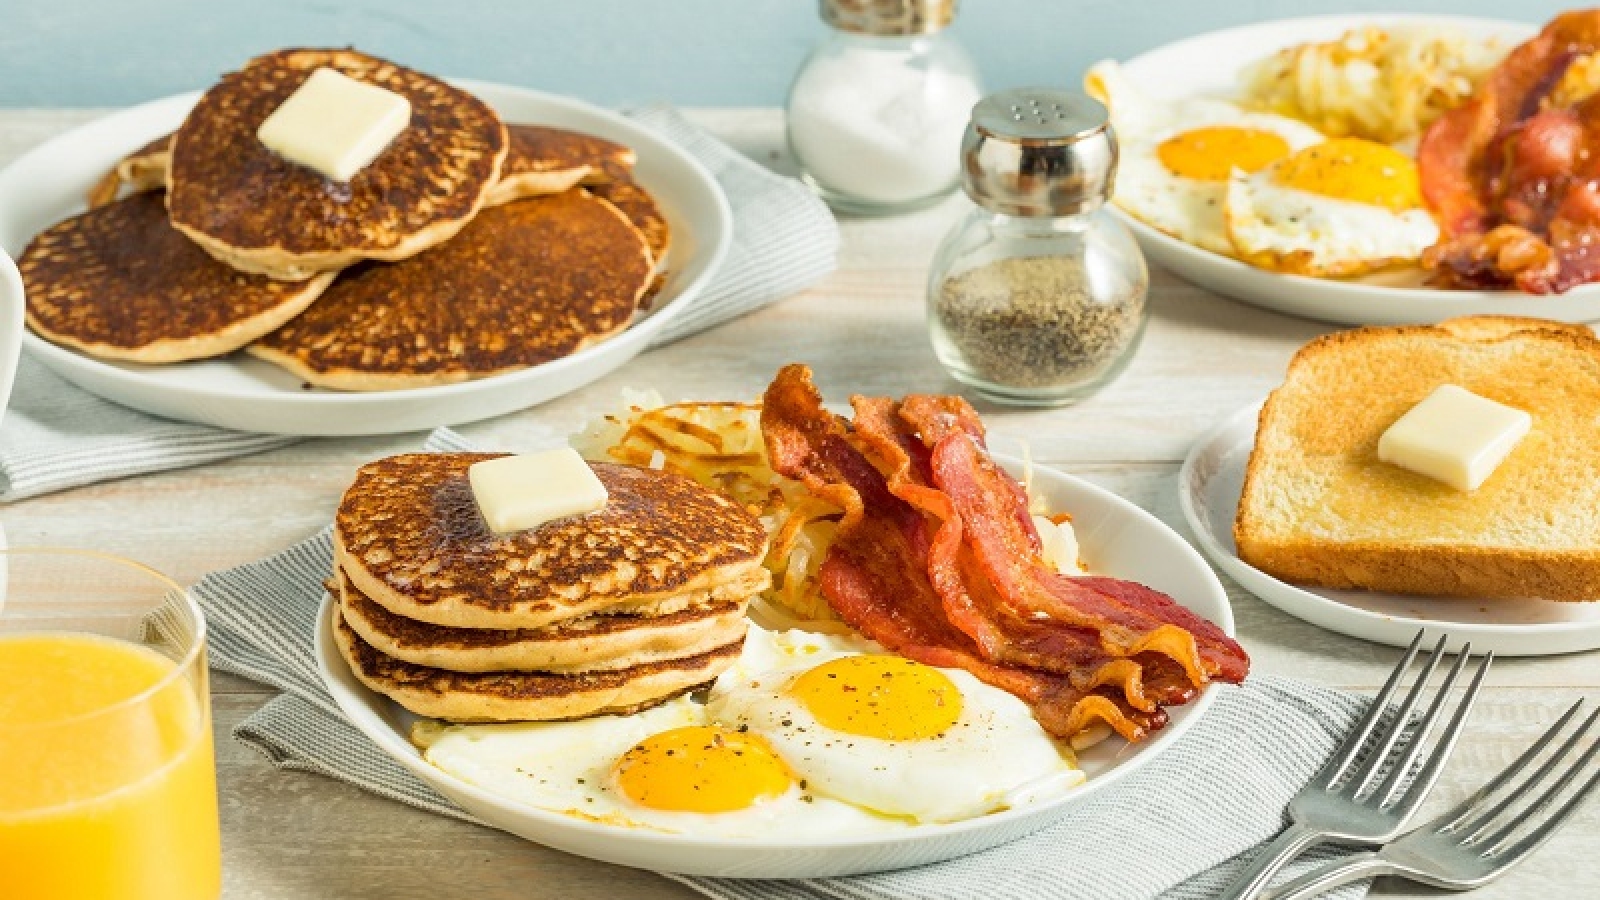 American breakfast: ingredients and recipes